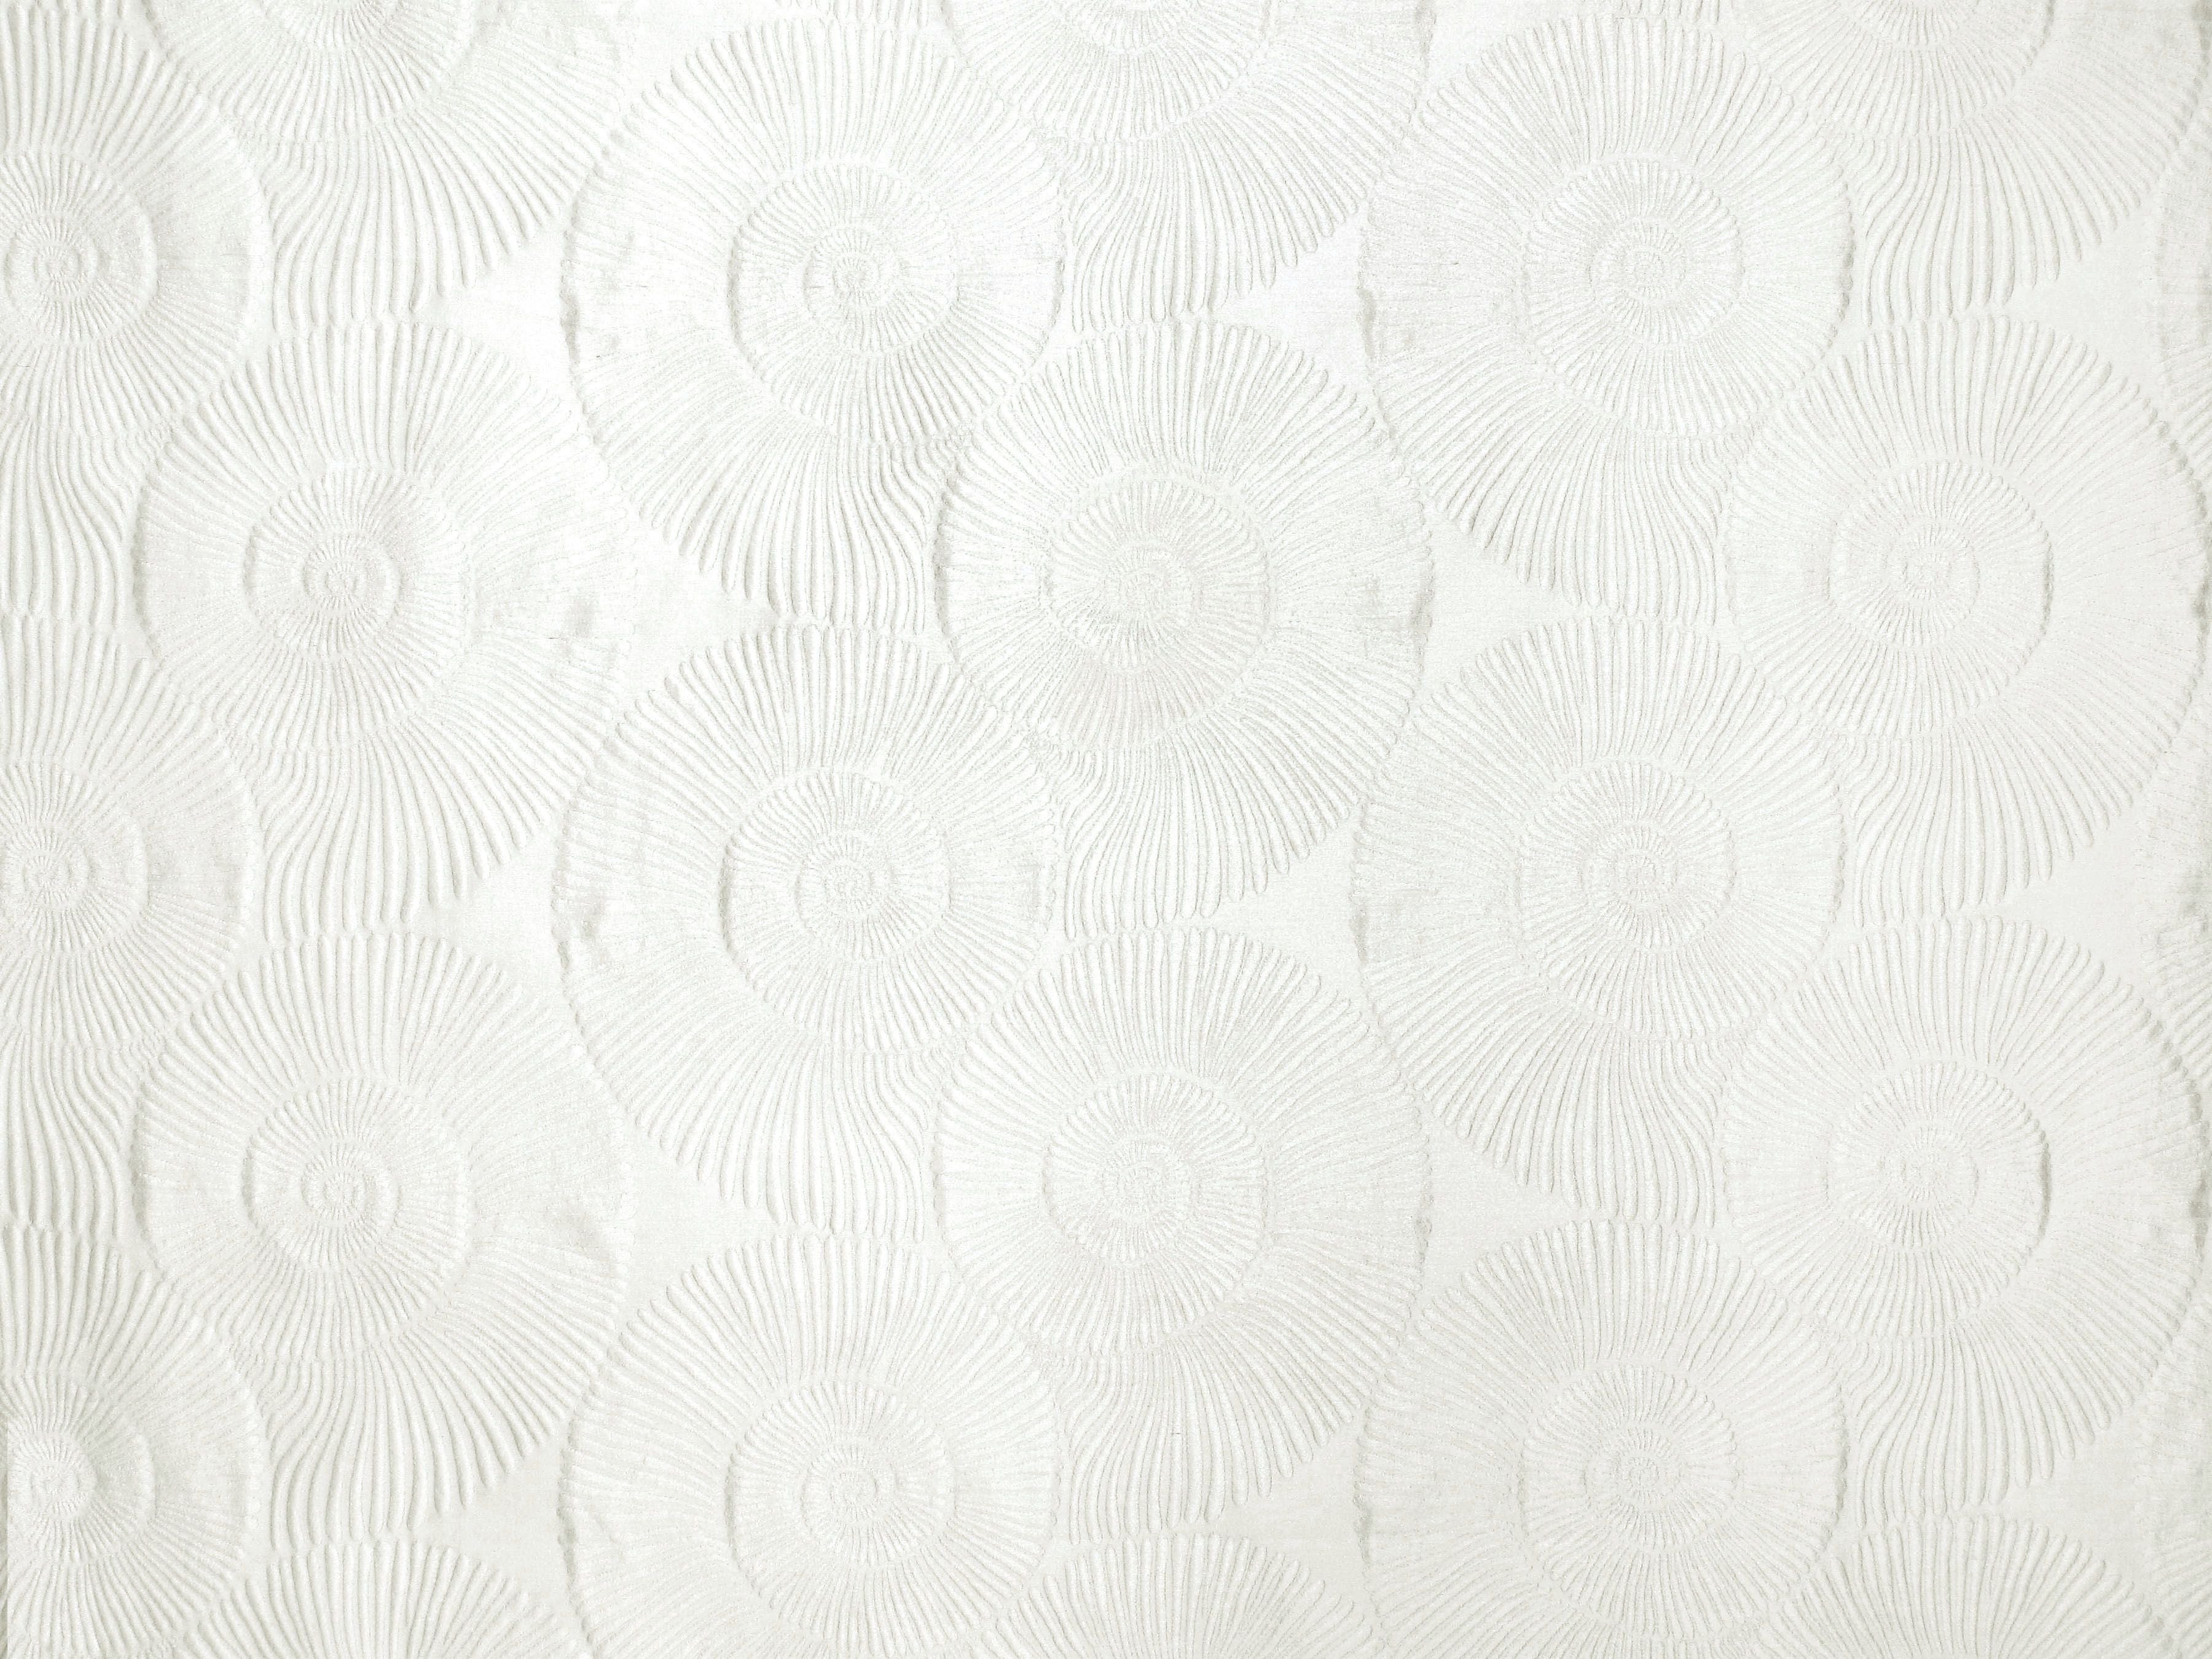 Nautilo Sheer fabric in eggshell color - pattern number S7 0002CENT - by Scalamandre in the Old World Weavers collection